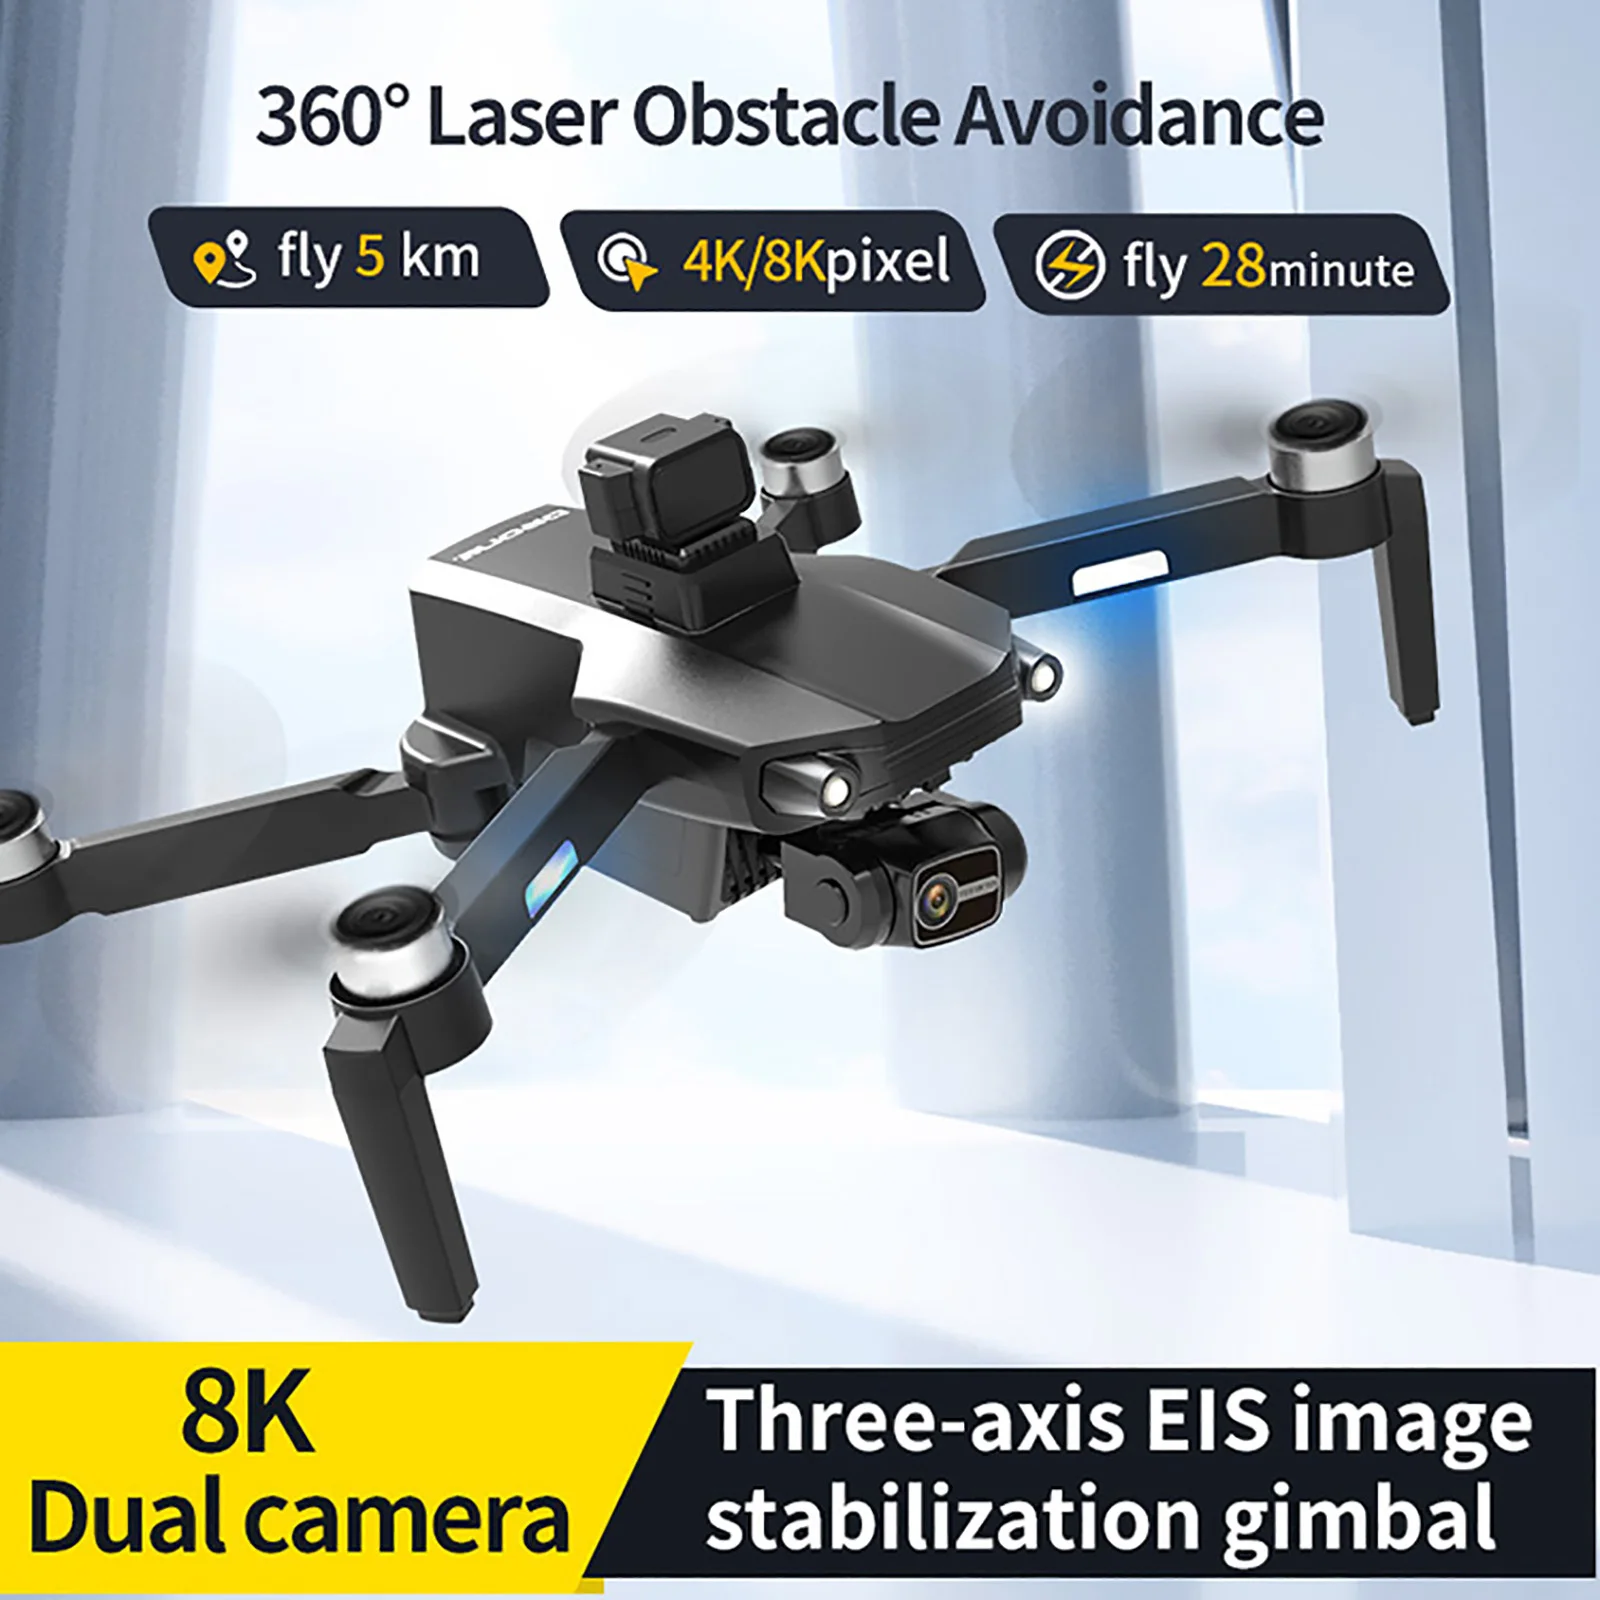 

360° Laser Obstacle Avoidance Drone 8K Dual Camera Three-axis EIS Image Stabilization Gimbal